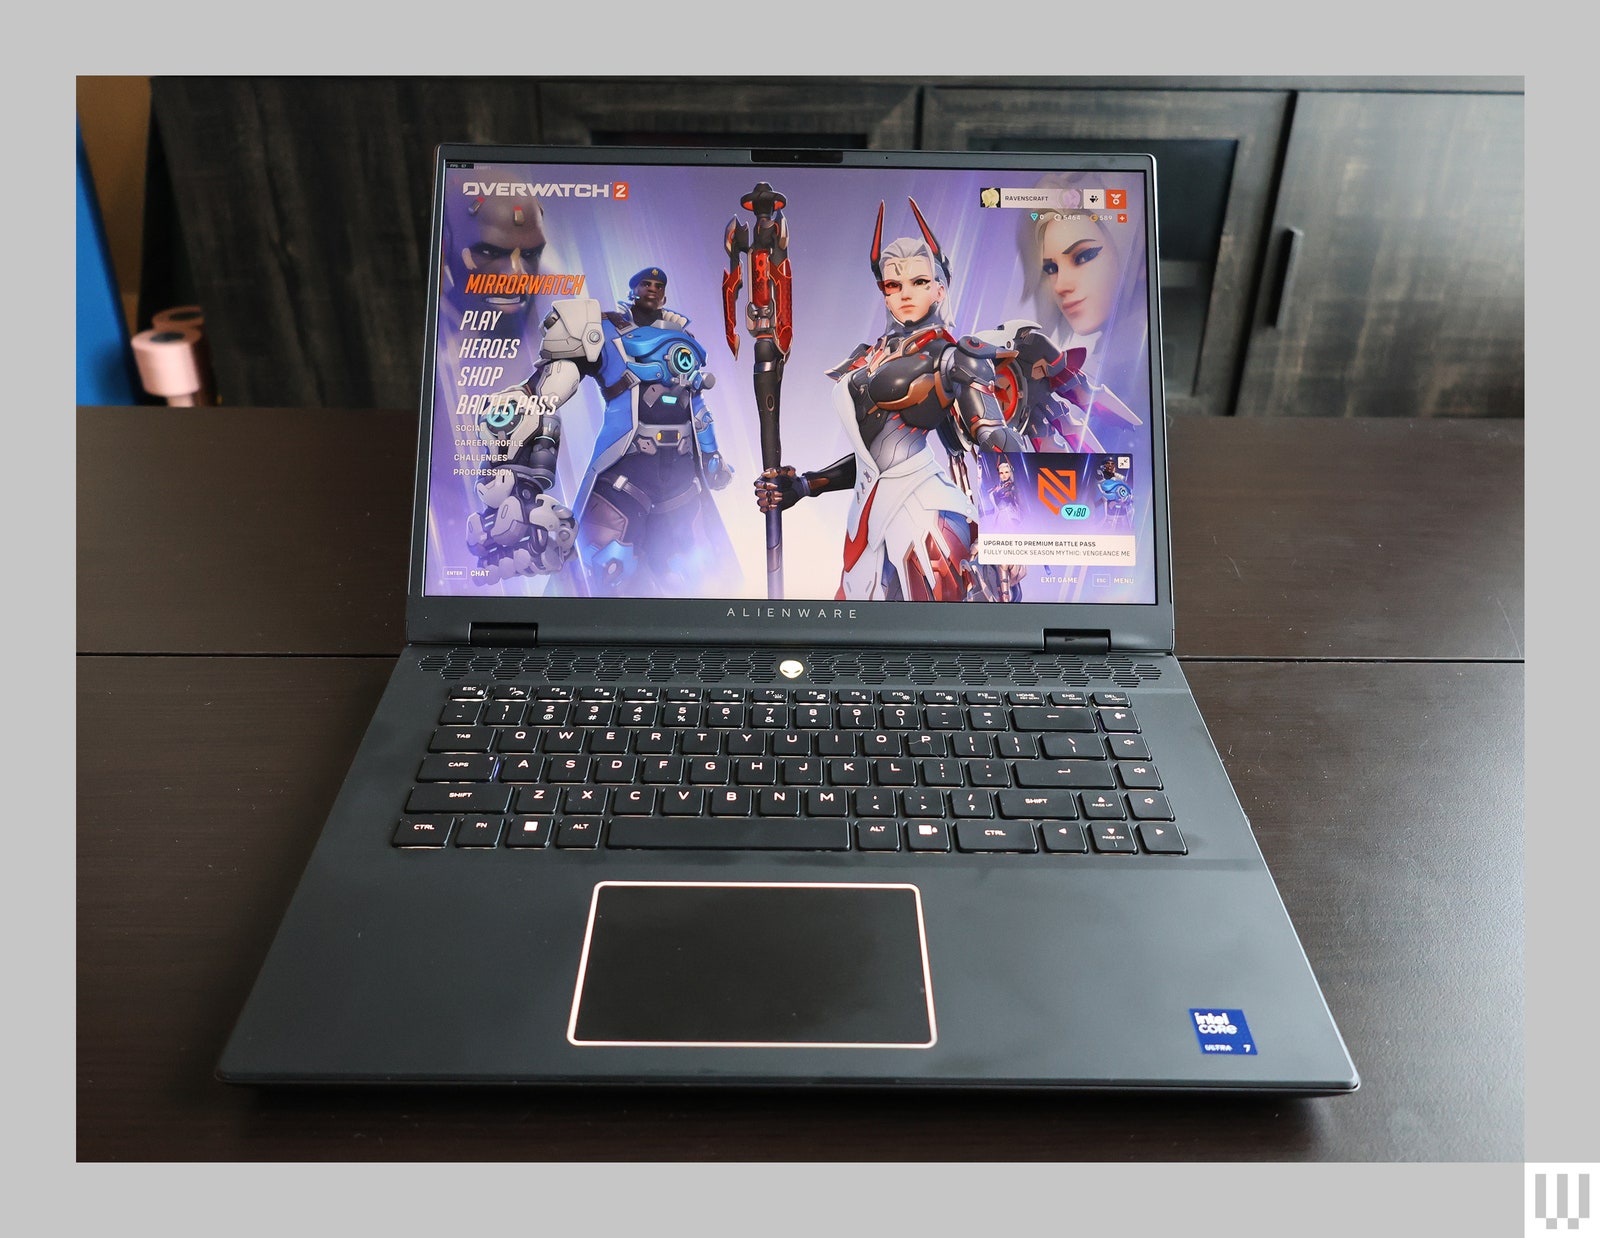 Black laptop opened and sitting on wooden surface with screen showing game characters